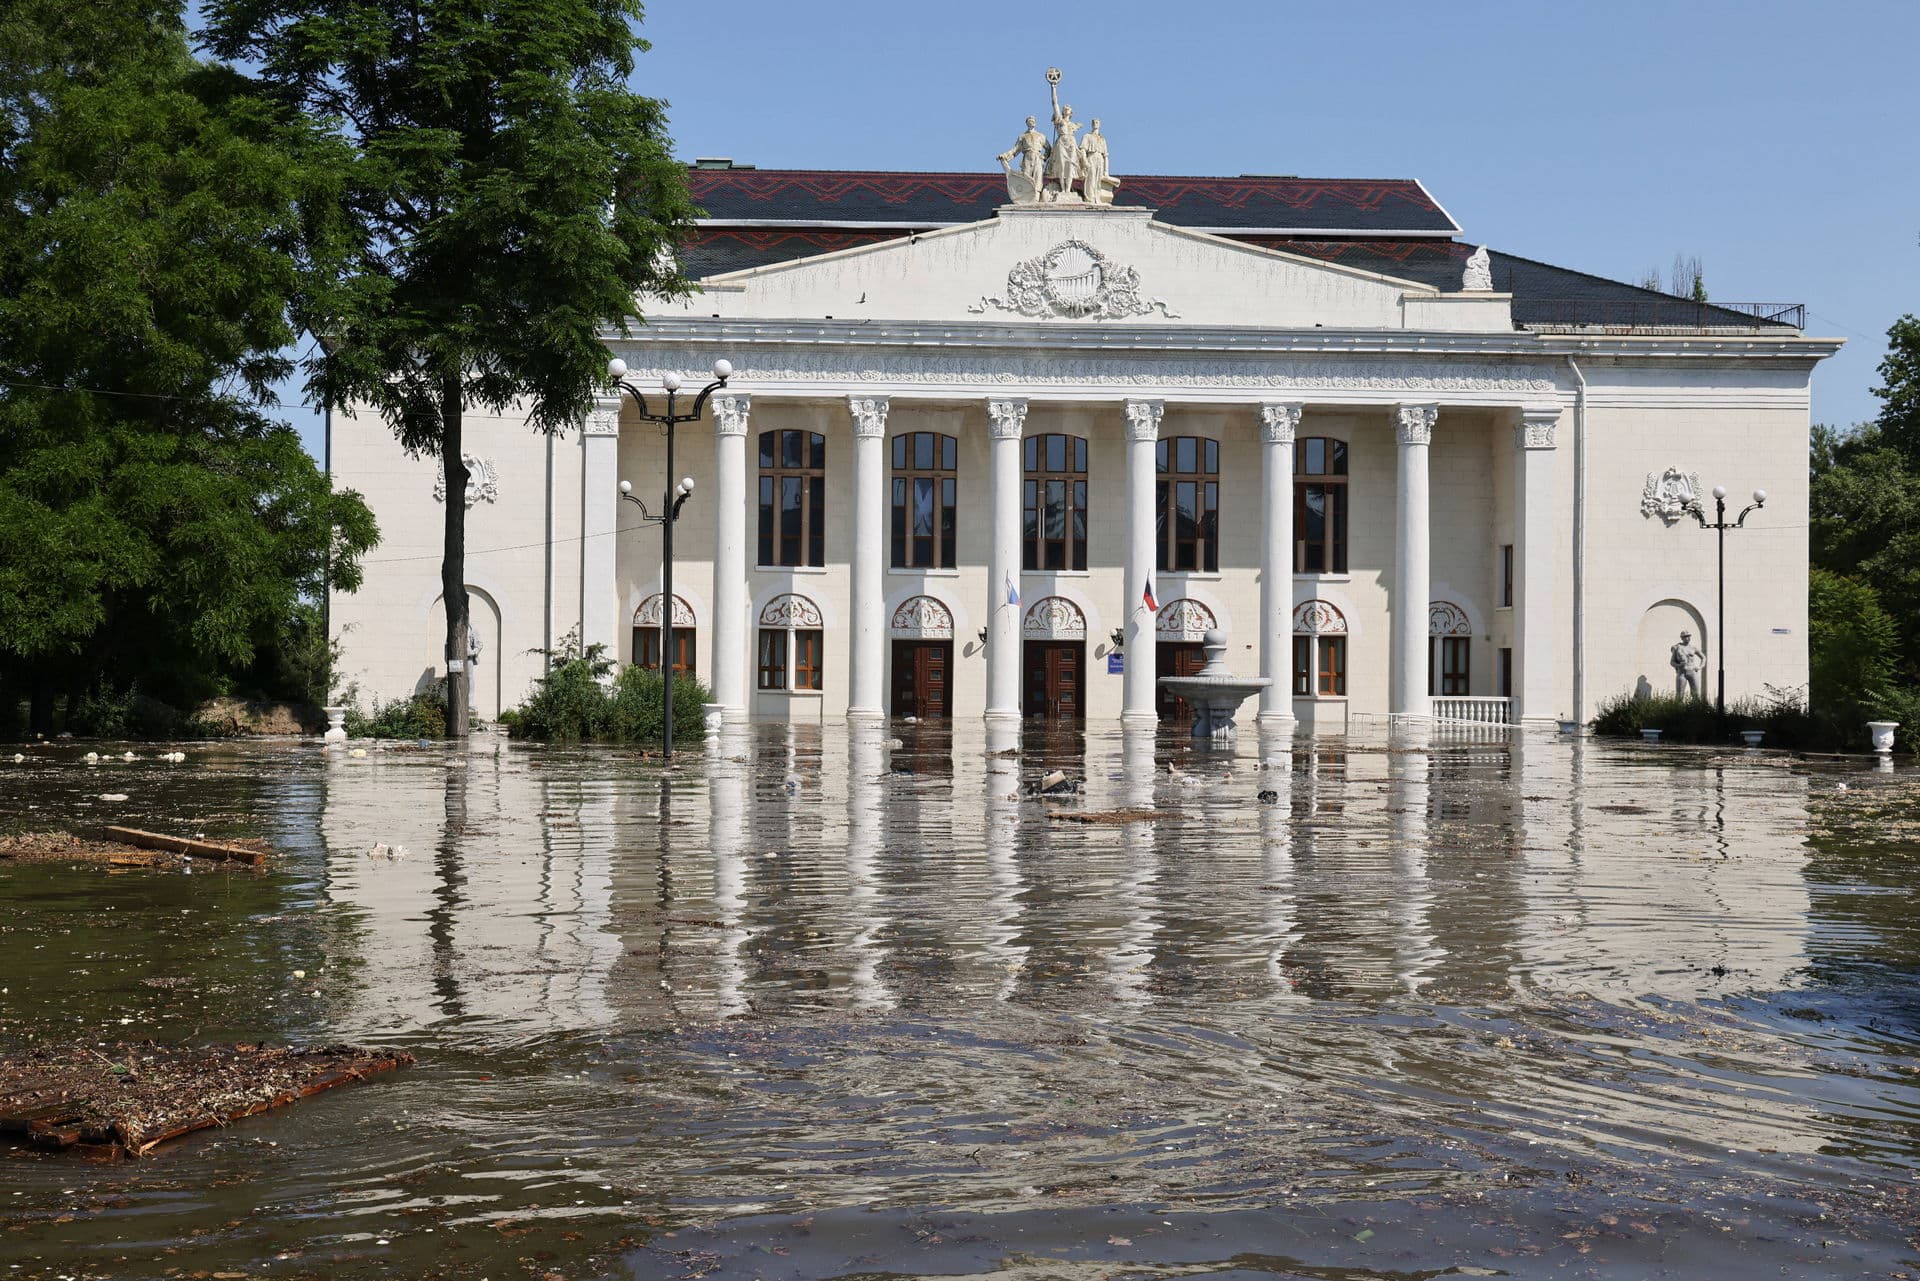 The community center in Nova Kakhovka as floodwaters continue to rise